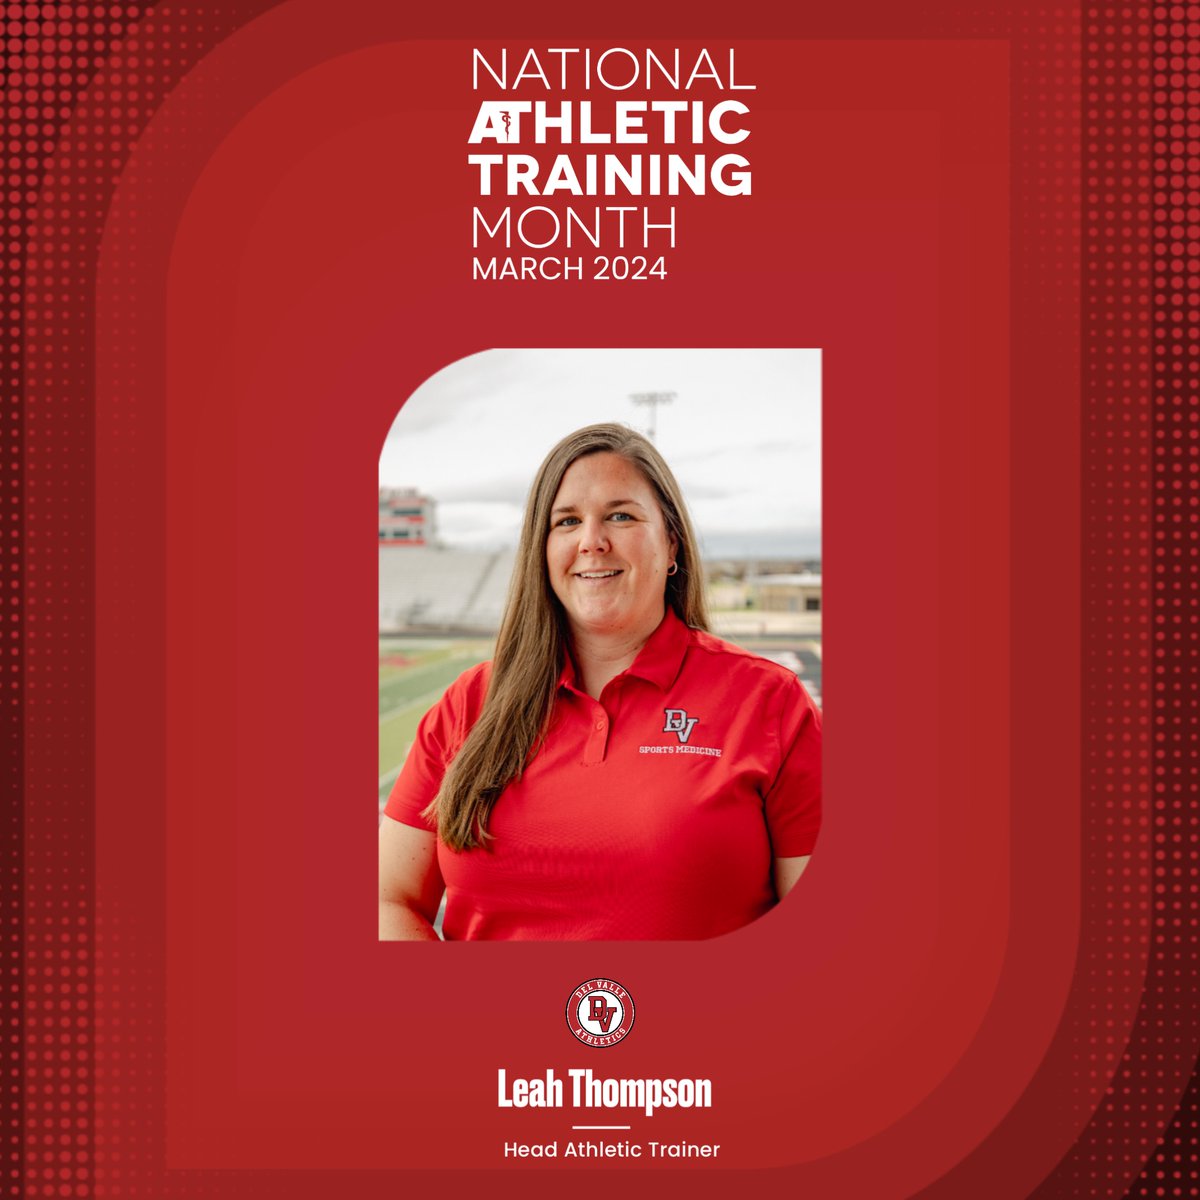 For National Athletic Training Month, Del Valle ISD Athletics recognizes Leah Thompson. Leah has served @DelValleISD students and coaches for 12 years. Our athletic trainers play a vital role in the health and success of our students. Thank you, Leah! 🫡